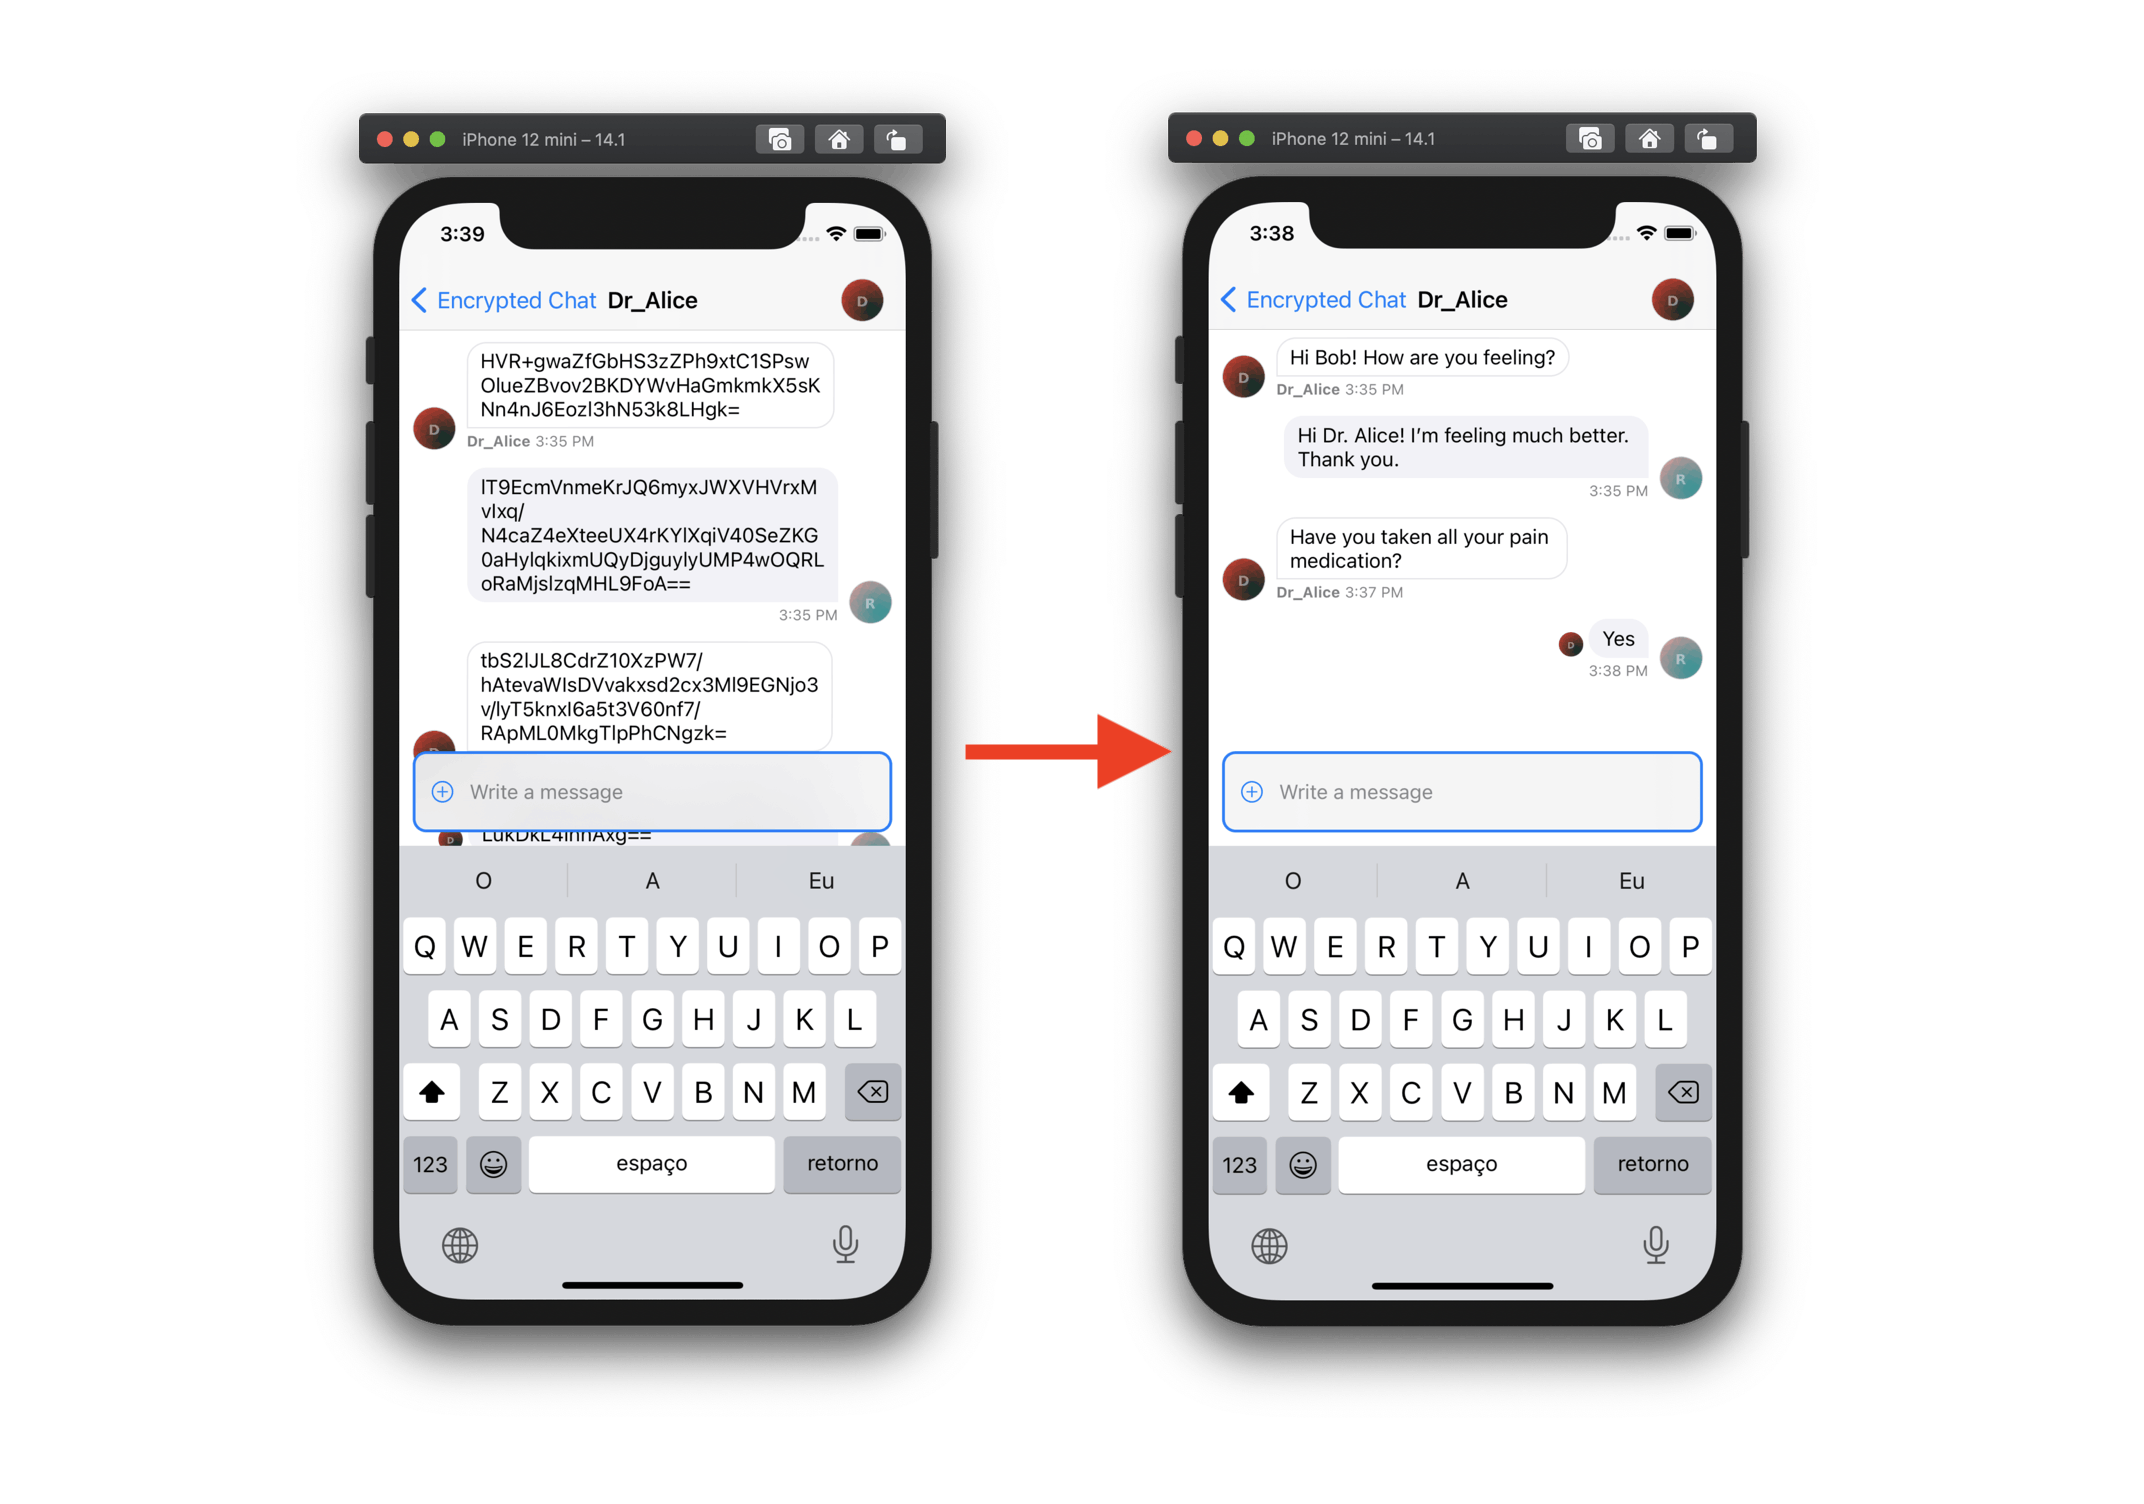 Image shows two chat screens, one with messages encrypted and the other with messages decrypted